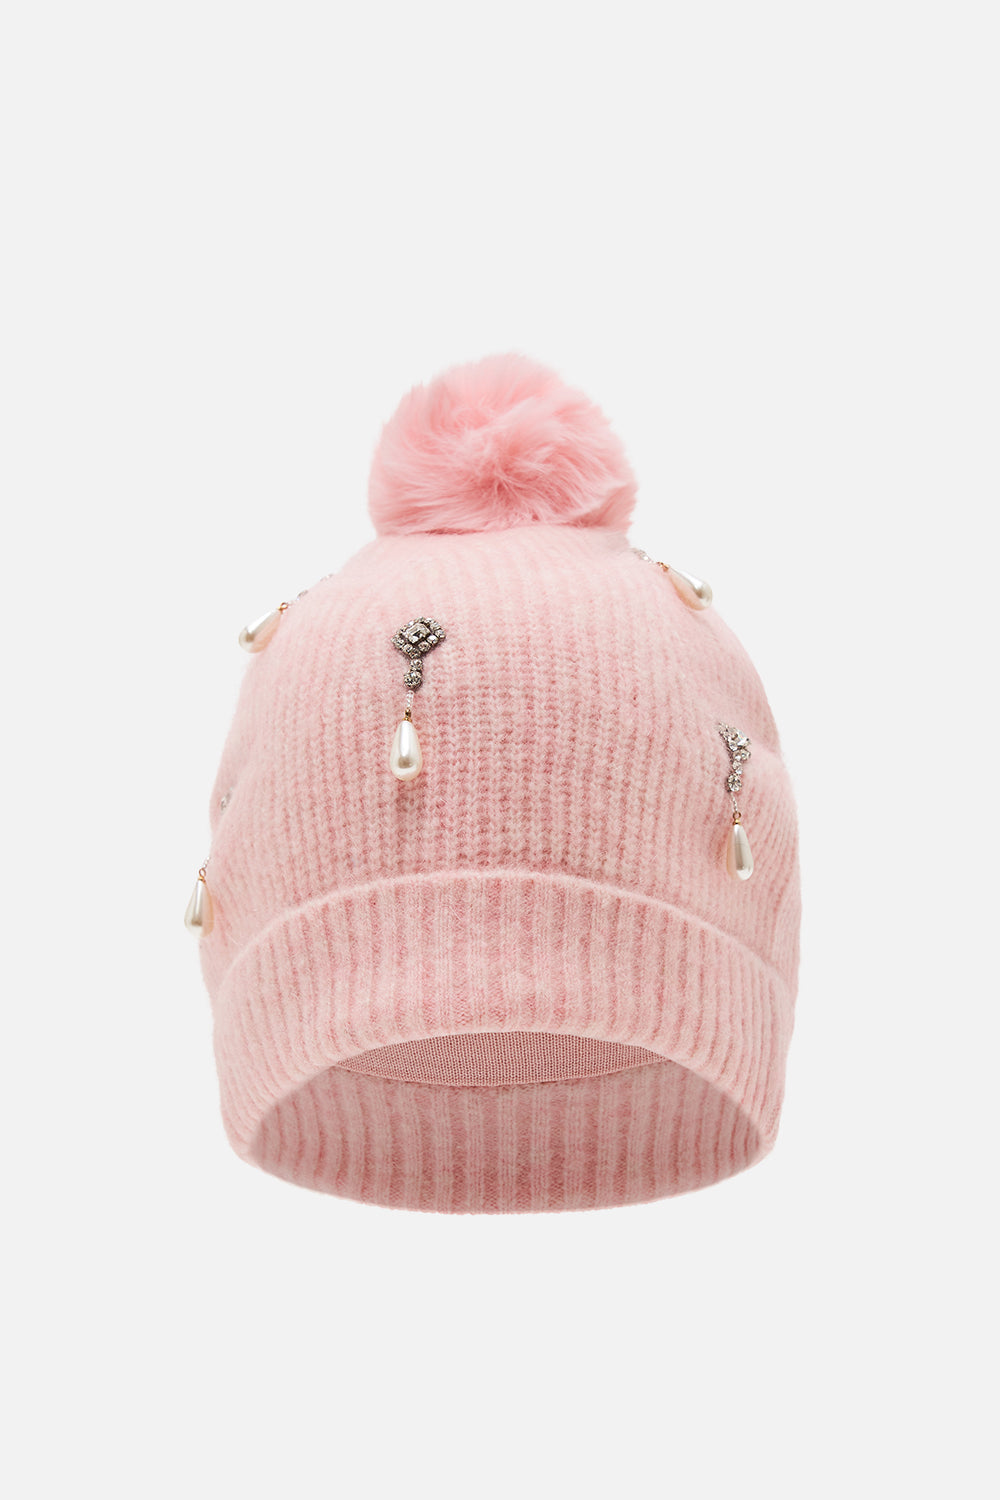 CAMILLA pink embellished beanie in Solid Pink